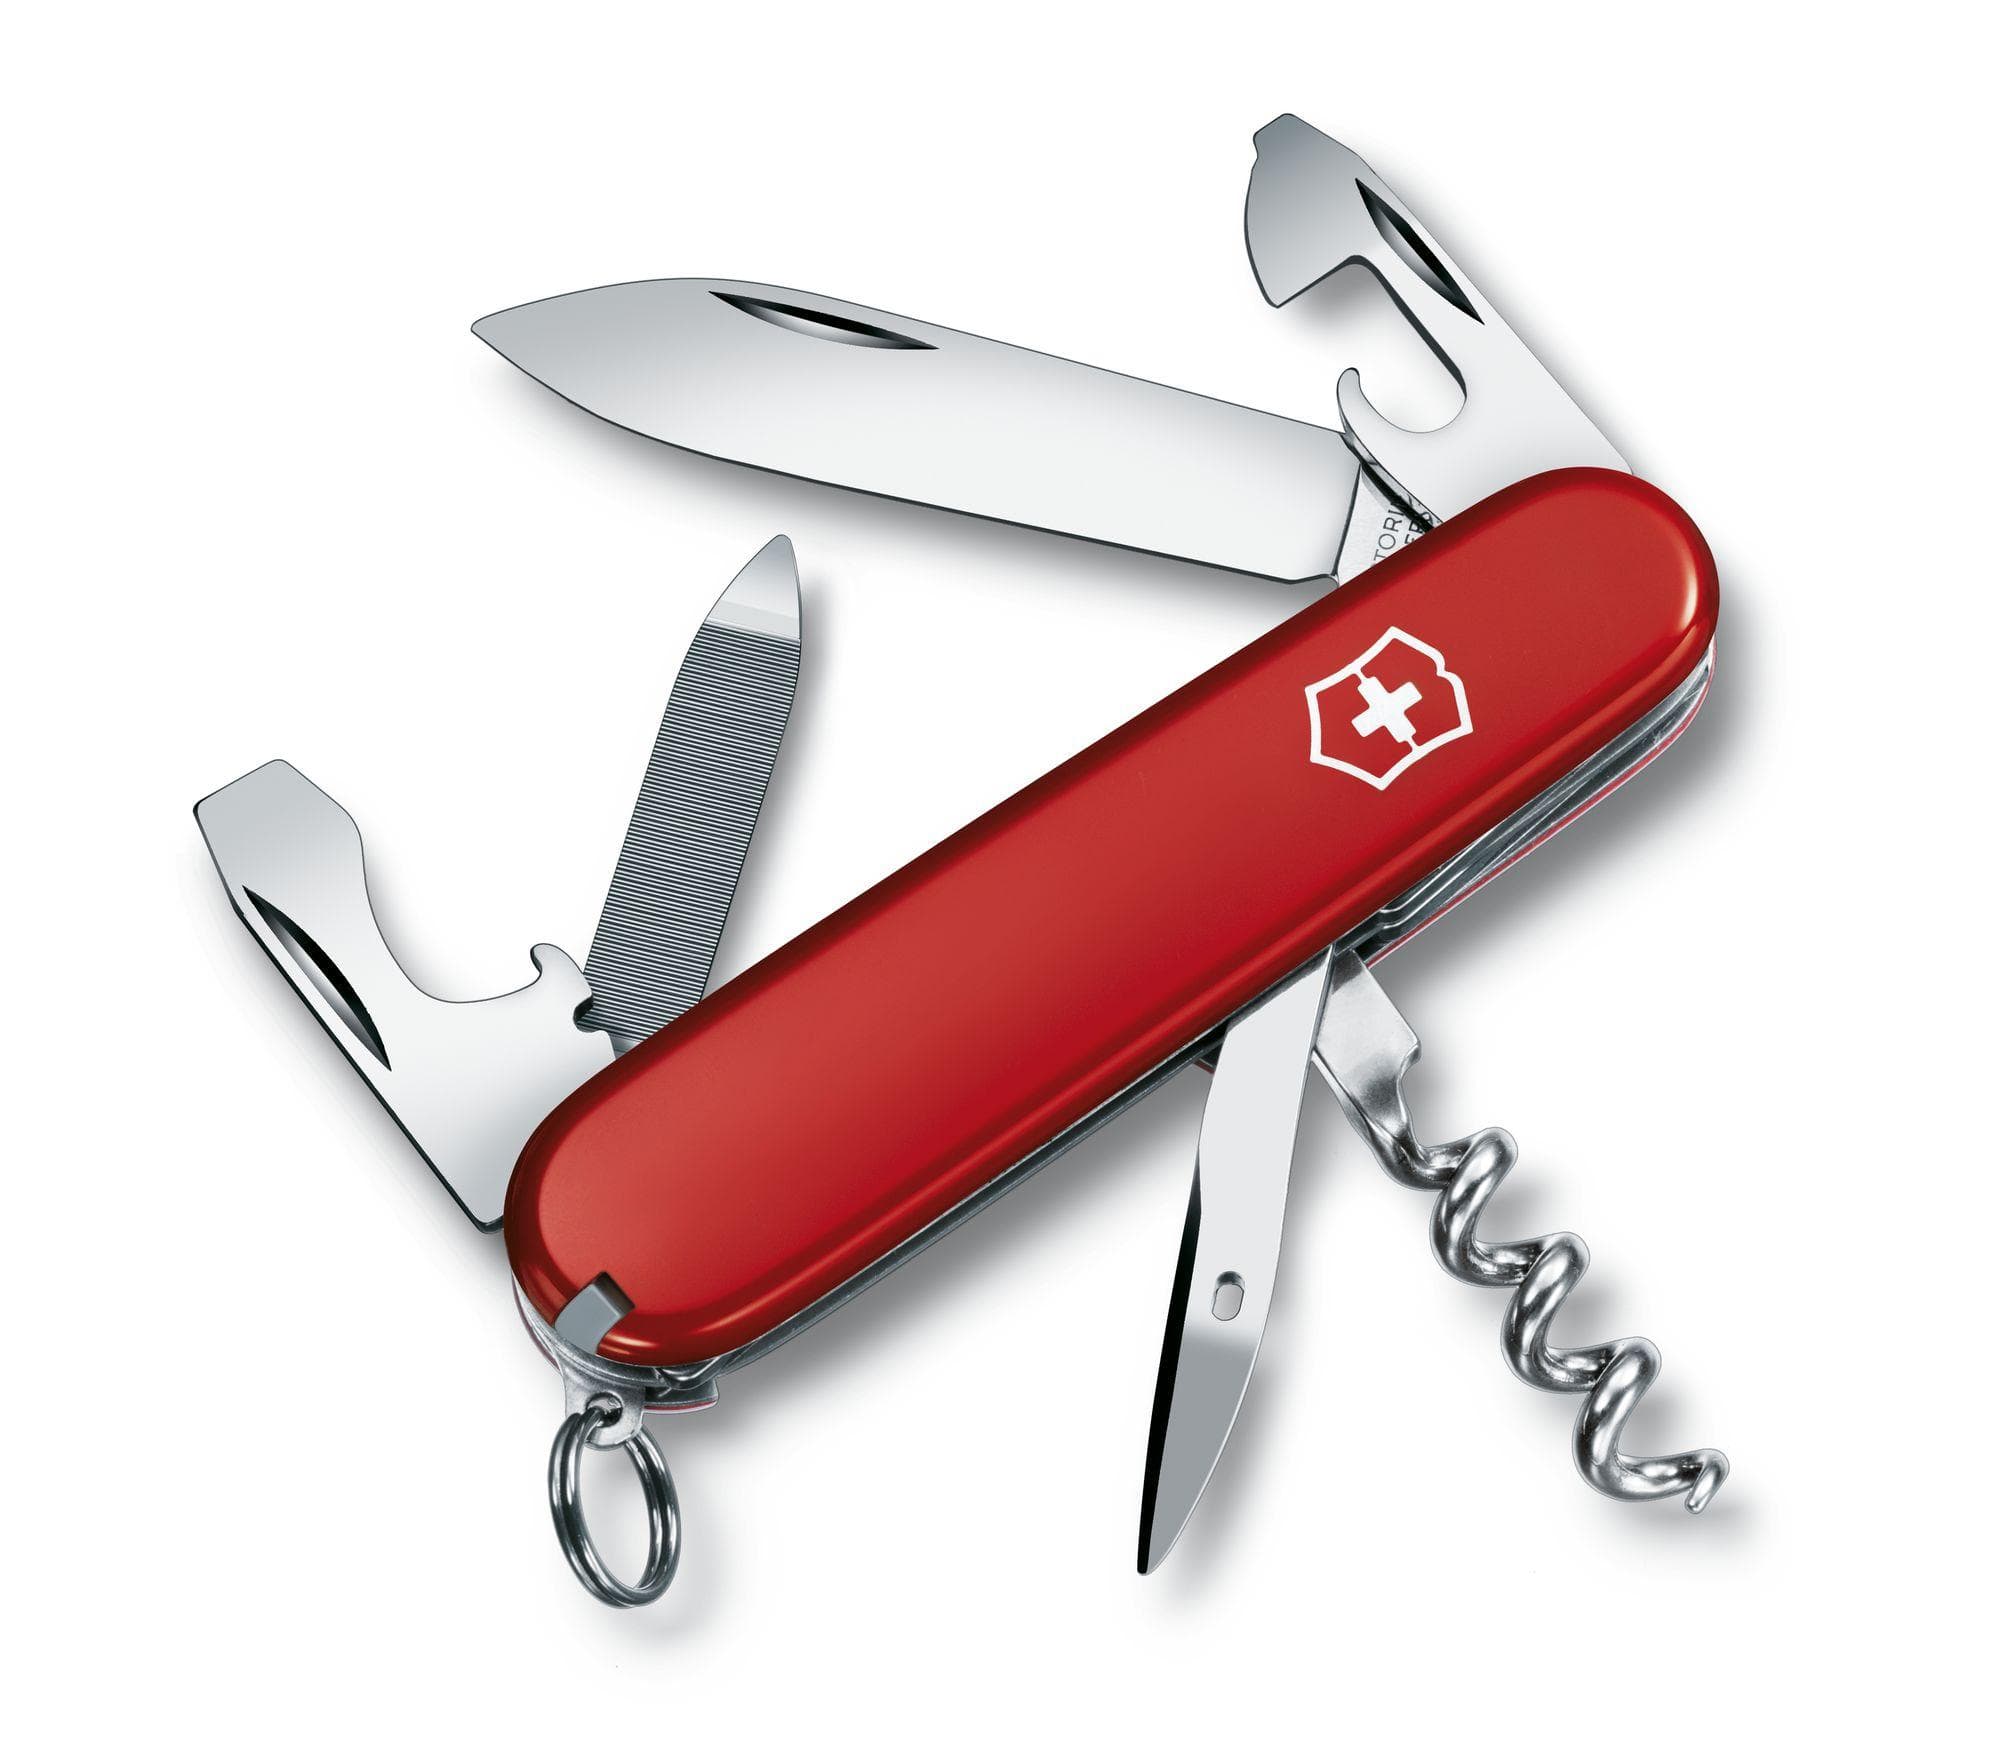 Victorinox Swiss Army Knife Sportman 84mm Red With 13 Functions - 7.6079